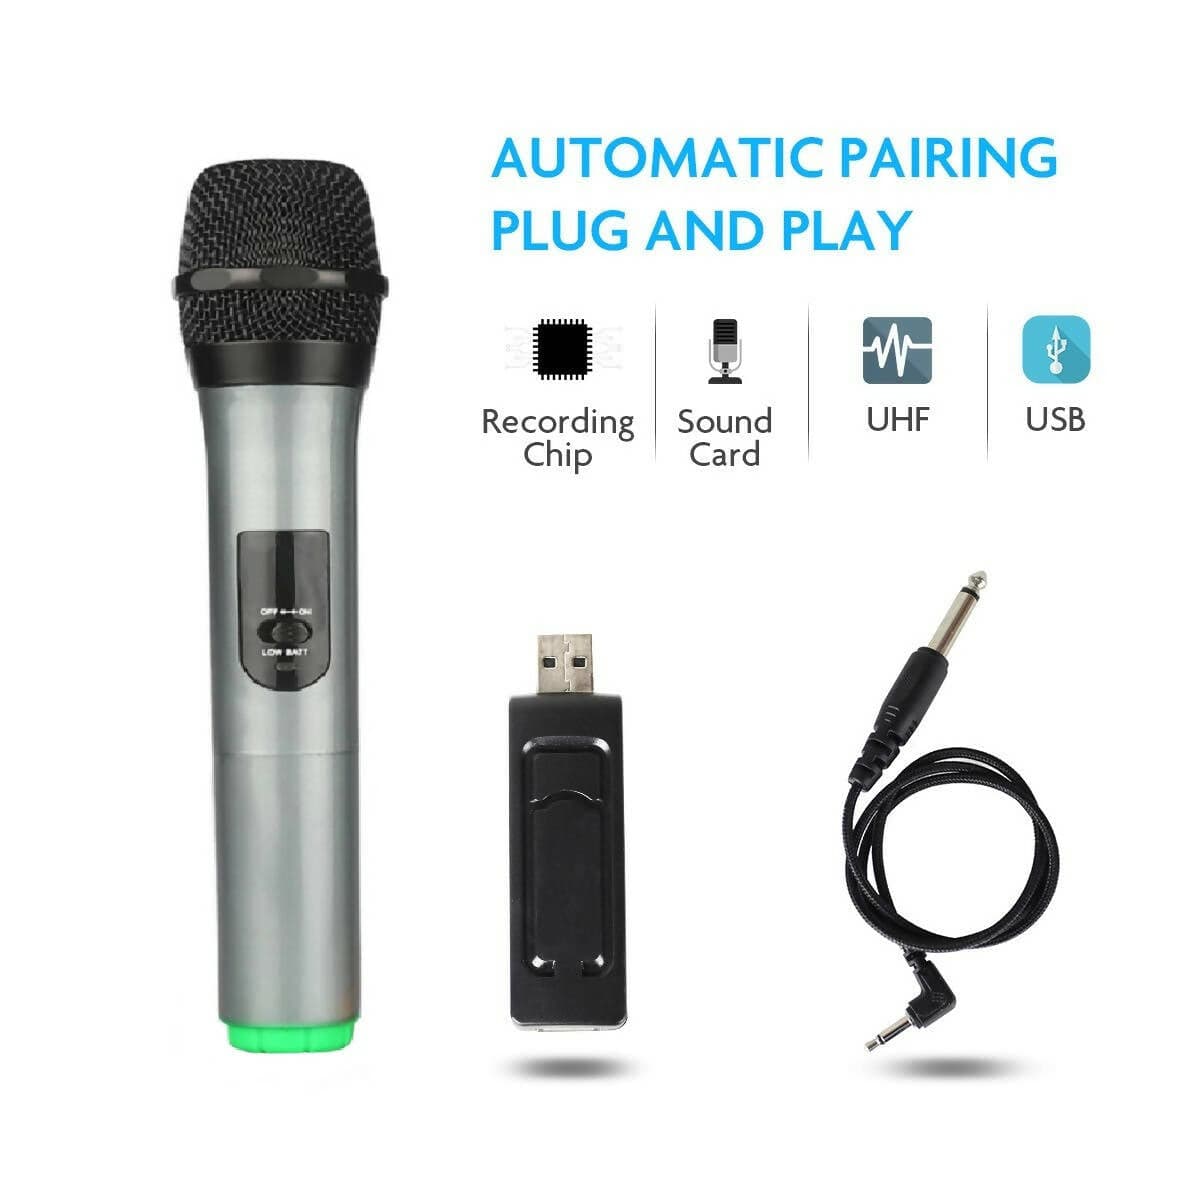 LANGTING Electronic Accessories LANGTING - UHF Single Channel Wireless Microphone - L16